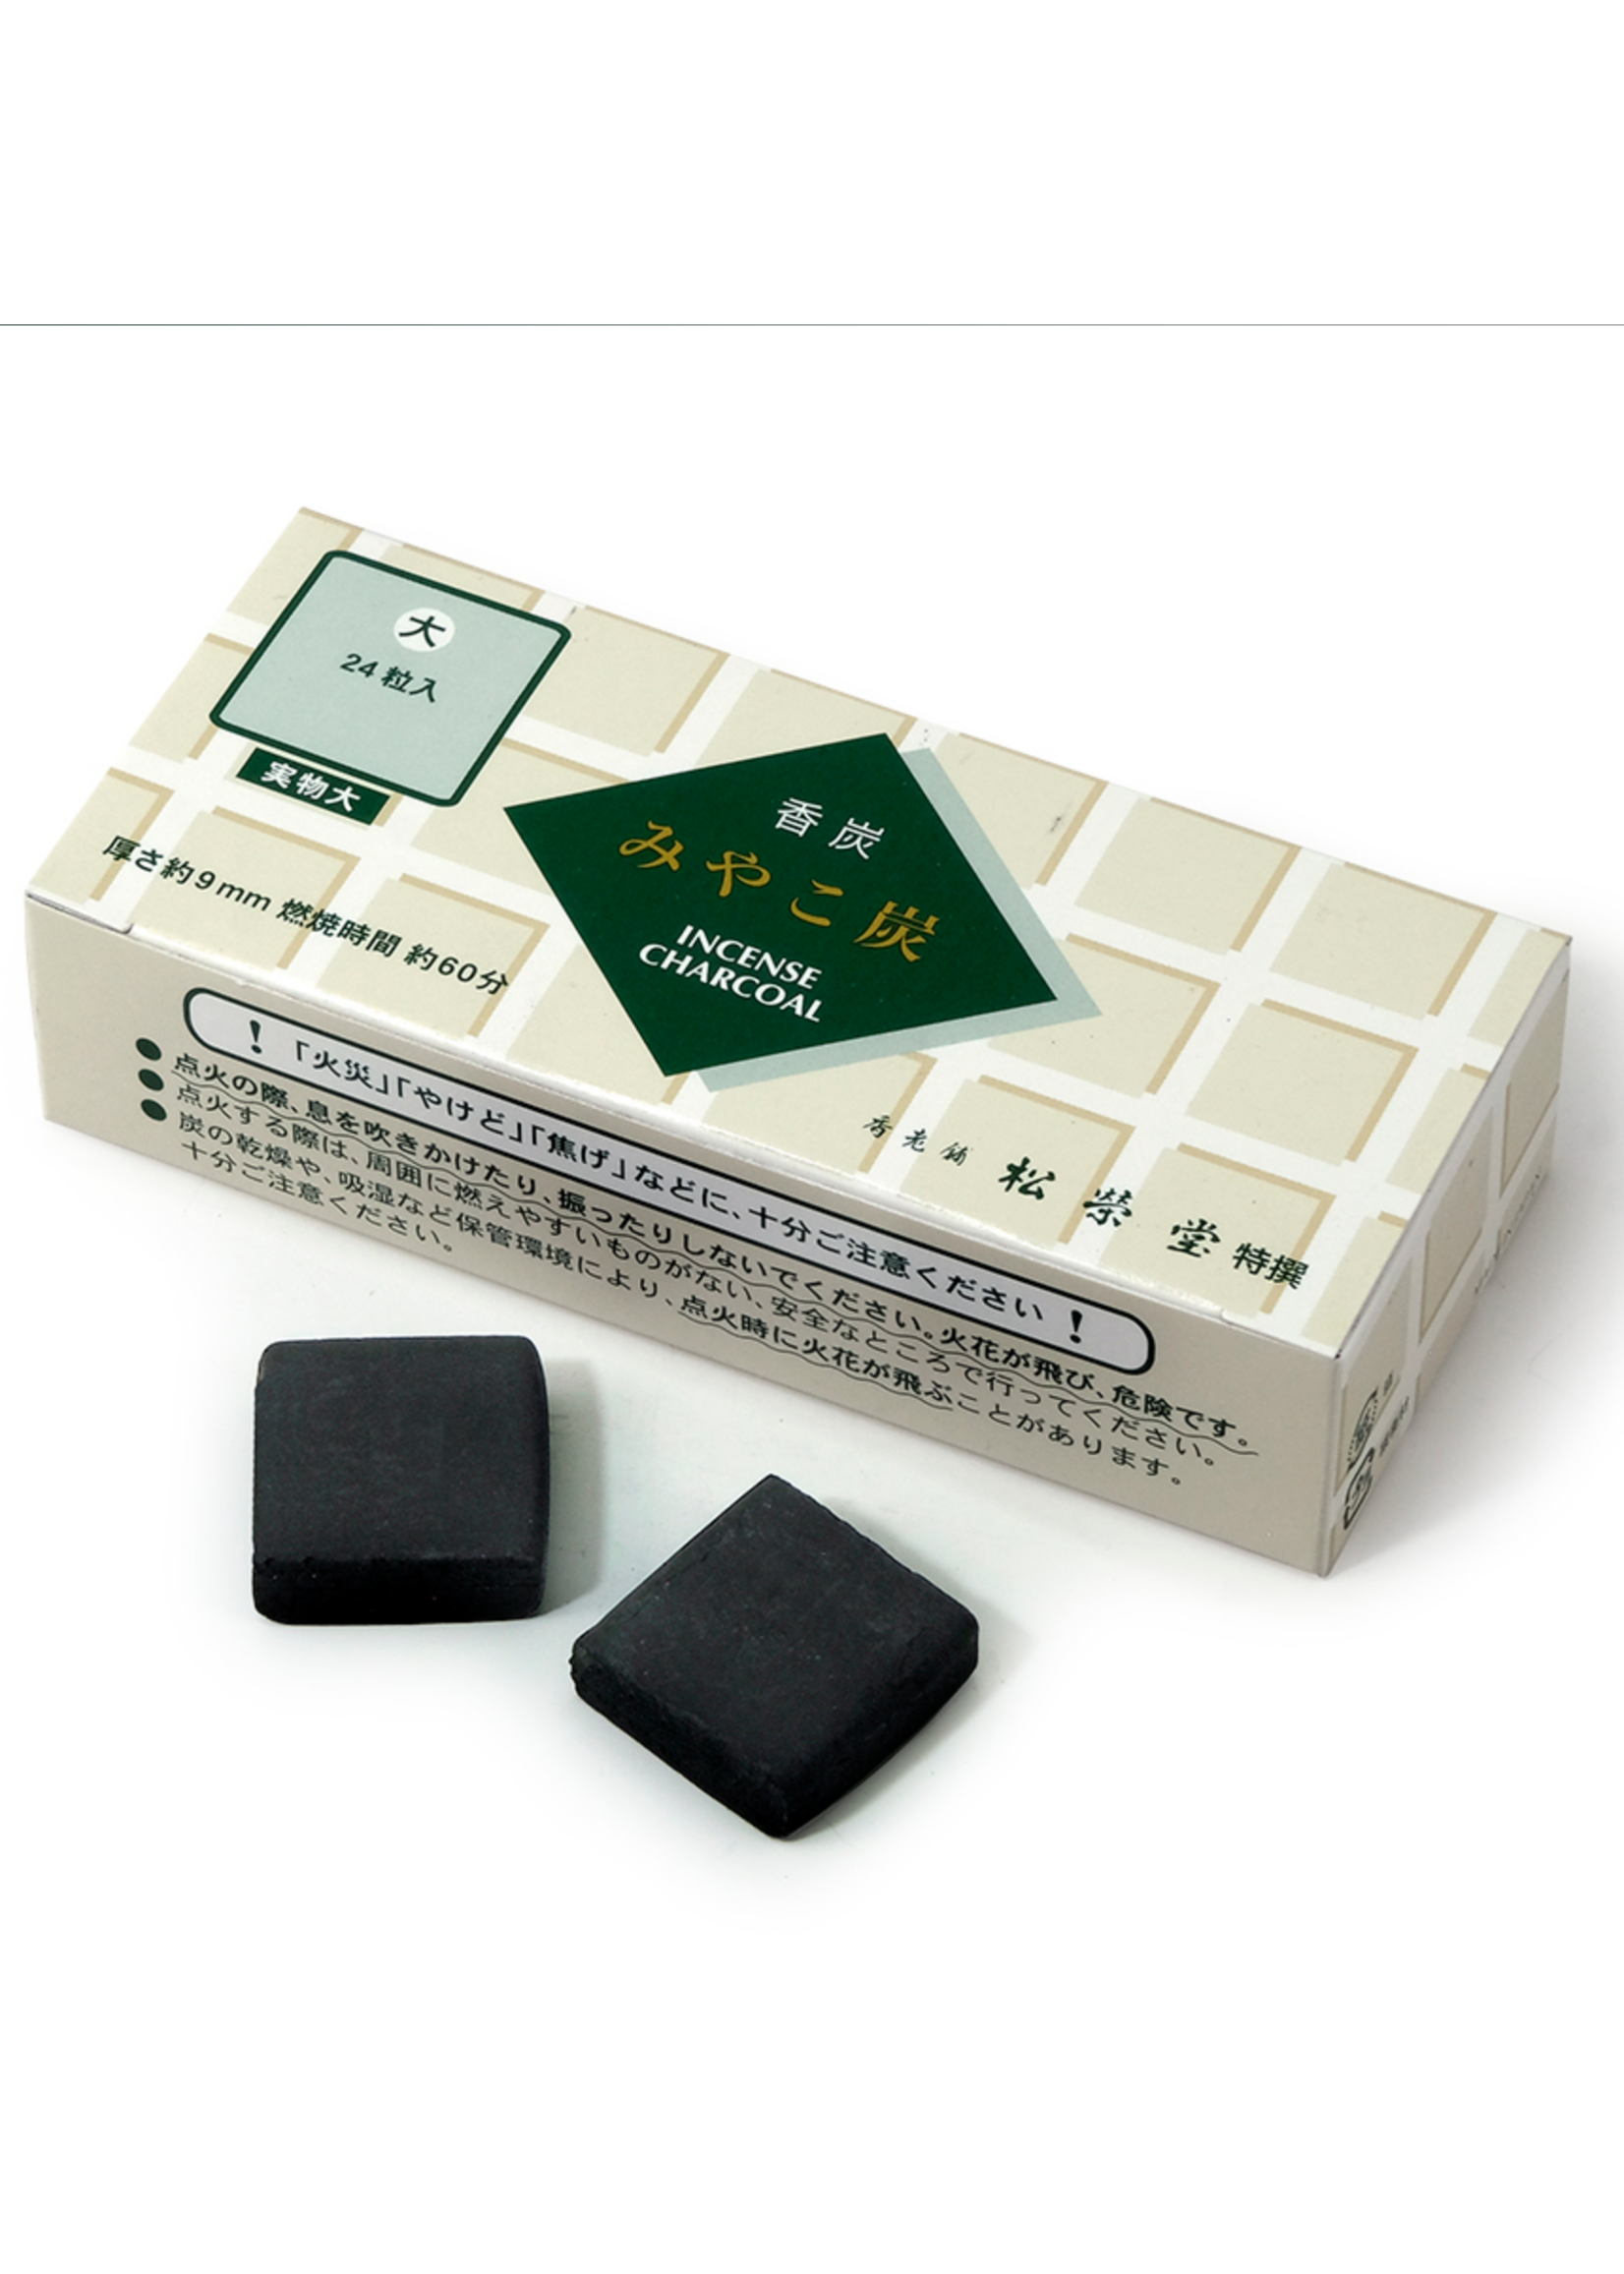 High Quality Japanese Bamboo Charcoal, 24 Square Pieces,